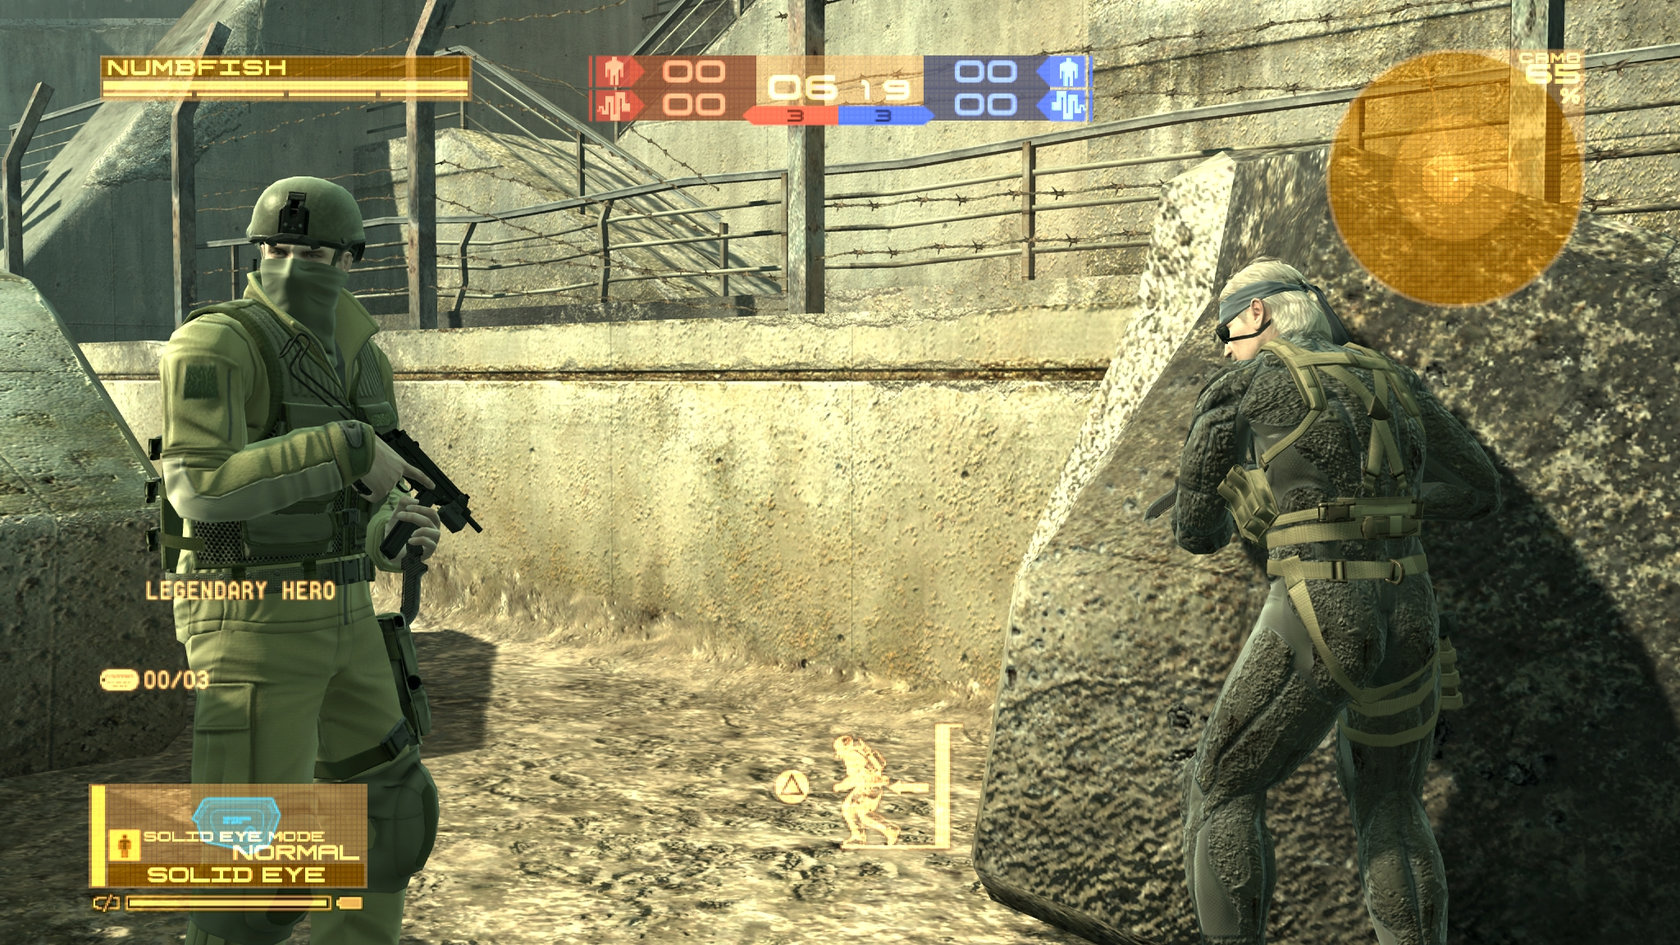 metal gear solid 4 guns of the patriots pc download